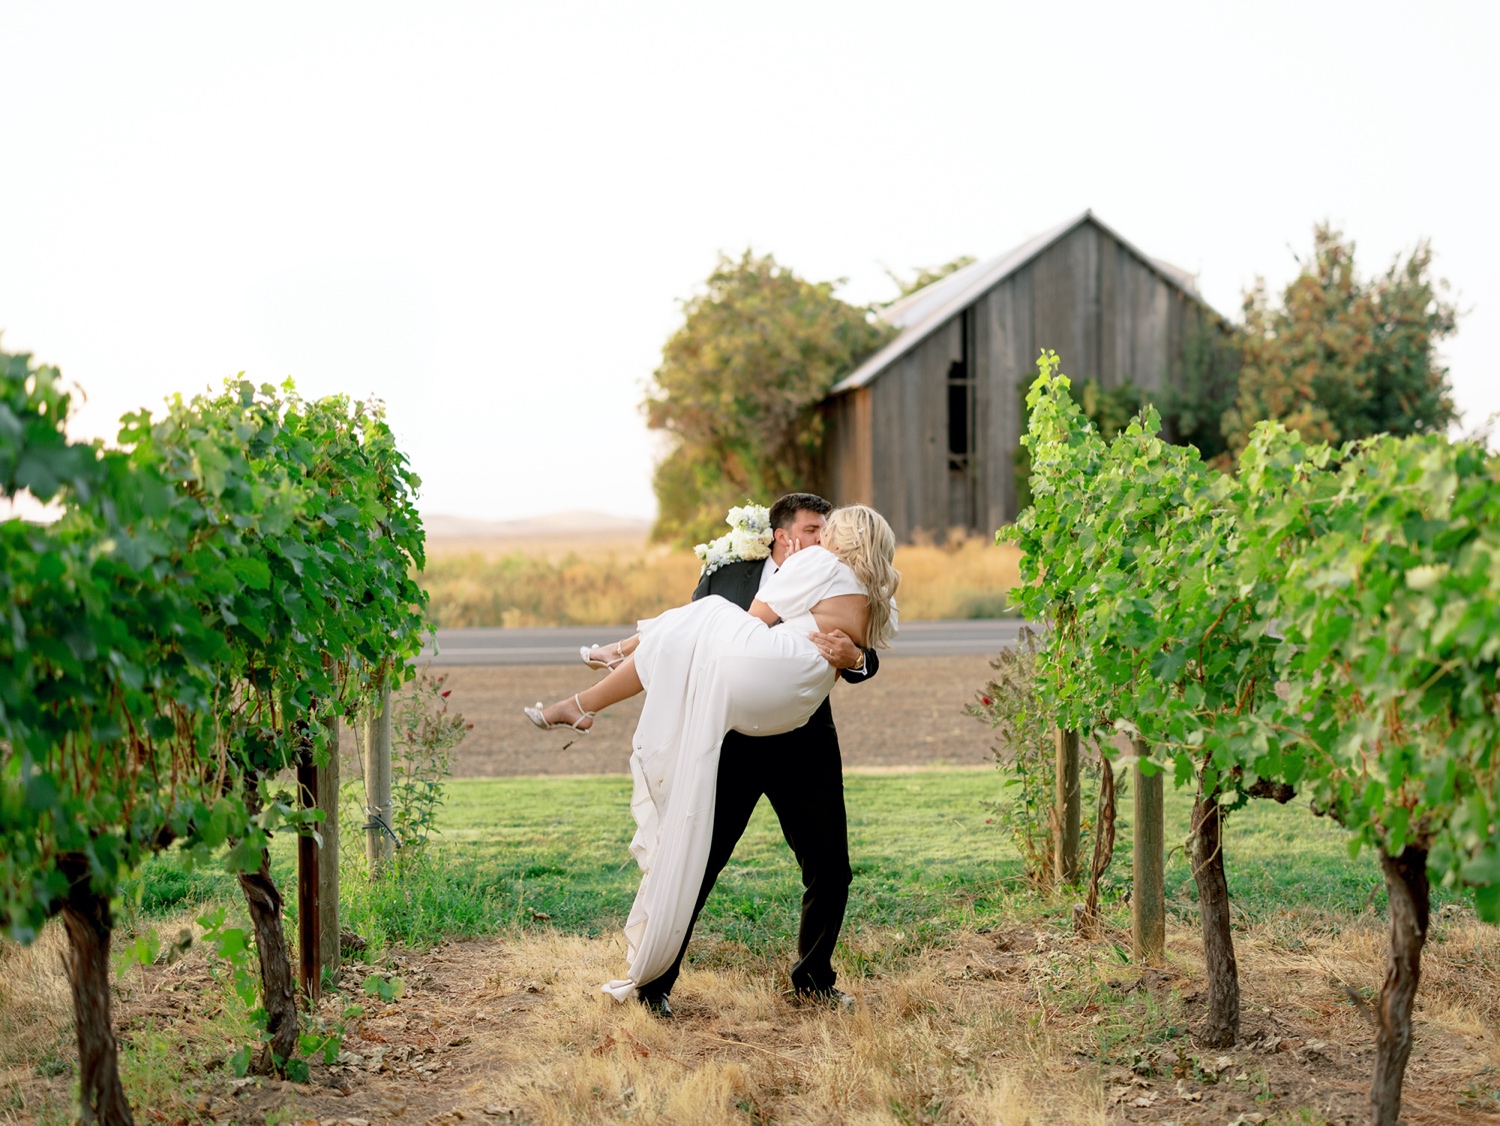 groom carries bride through abeja winery's vineyard during sunset portraits